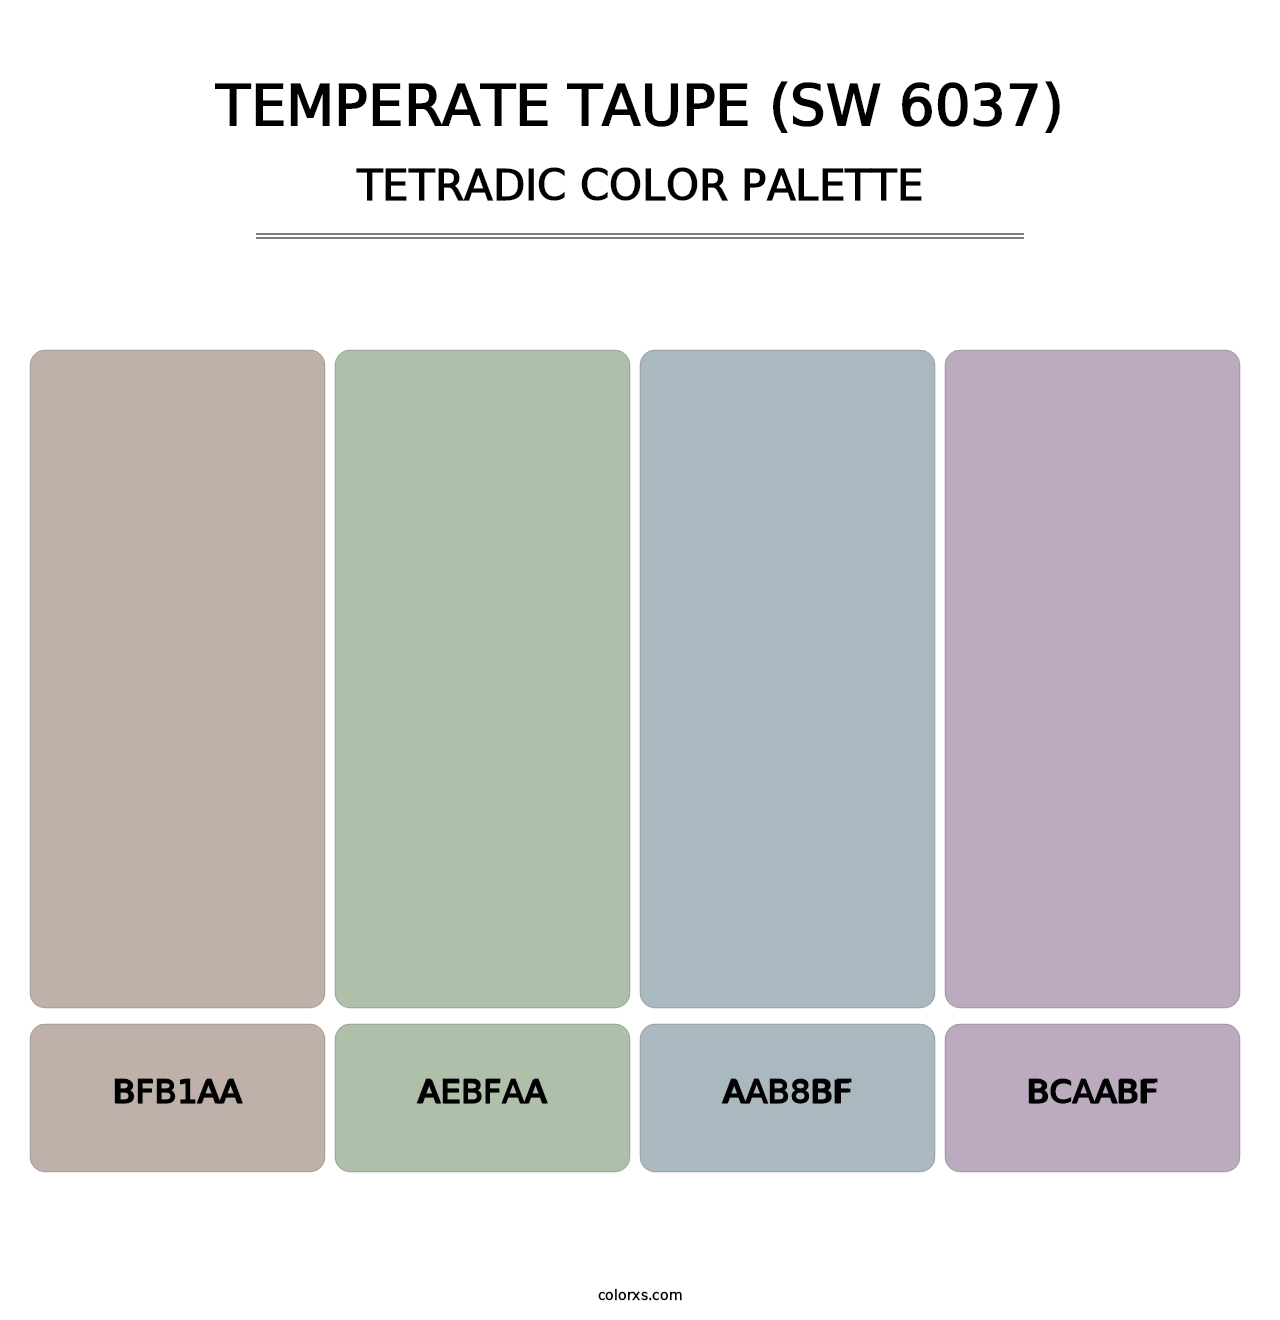 Temperate Taupe (SW 6037) - Tetradic Color Palette